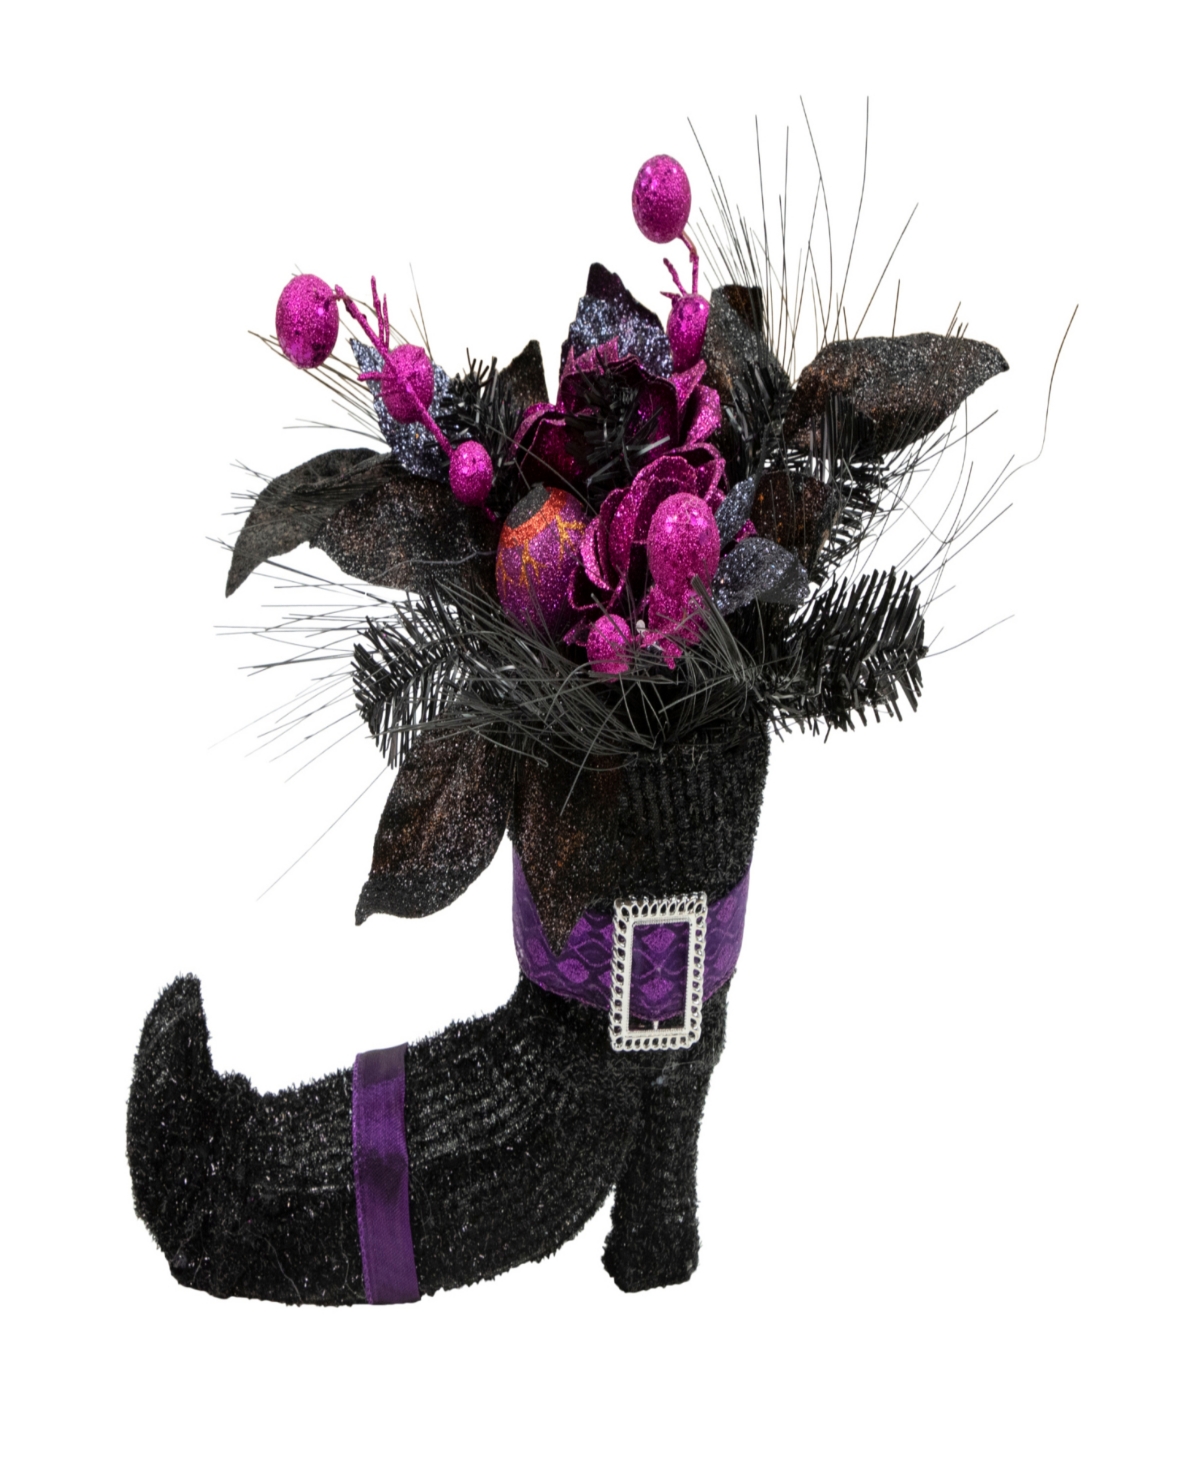 12" Witch's Boot with Glittered Roses Halloween Decoration - Black